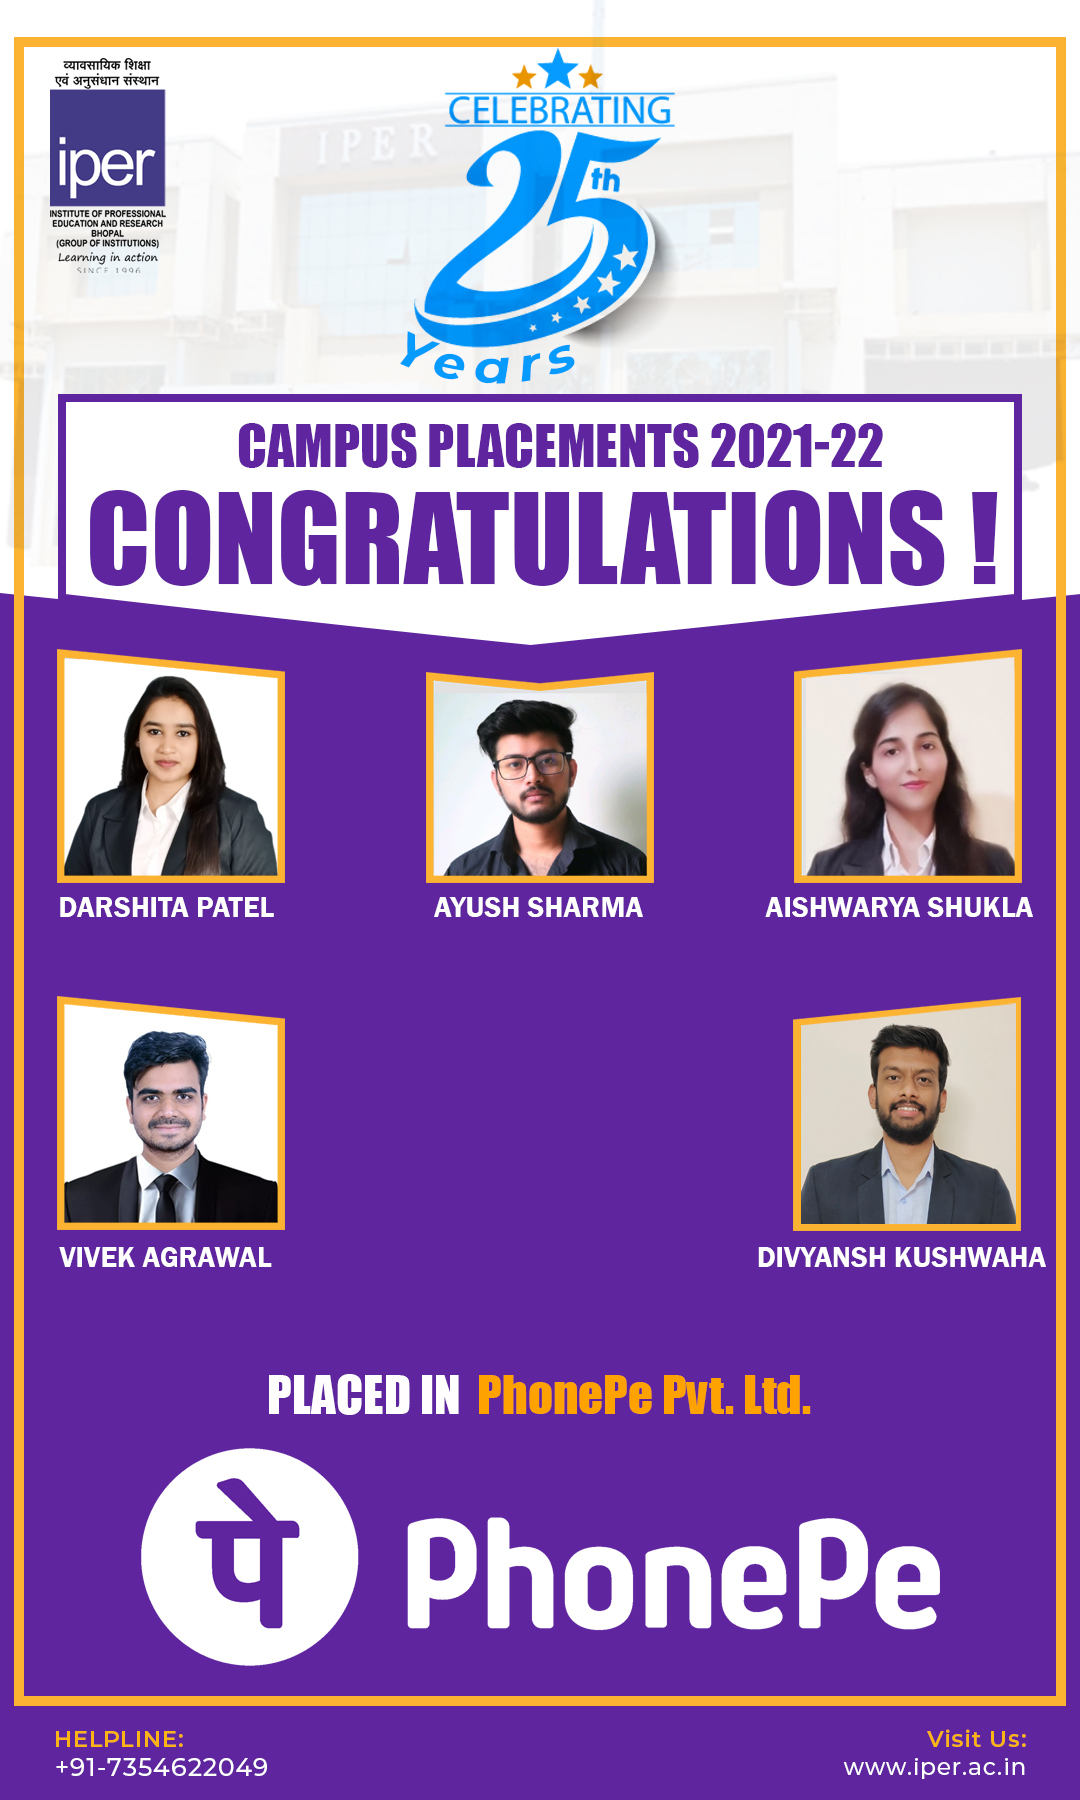 CAMPUS PLACEMENTS 2021-22 (Layout 5) PhonePe